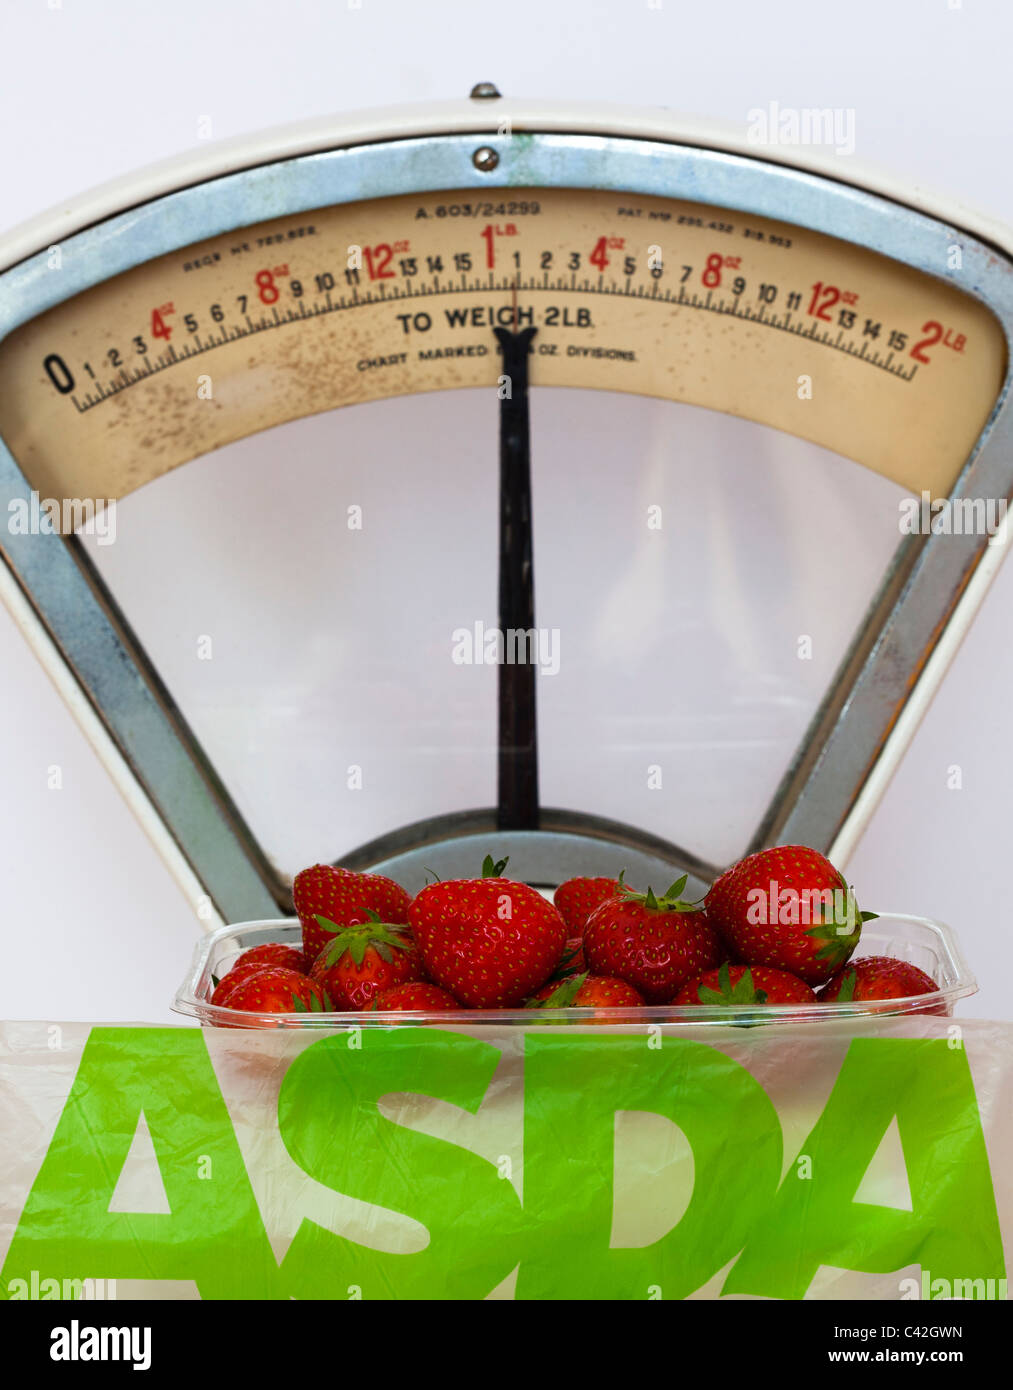 29th May 2011 Asda will return to the imperial measures of pounds and ounces on packs of strawberries from  30th May 2011 Stock Photo